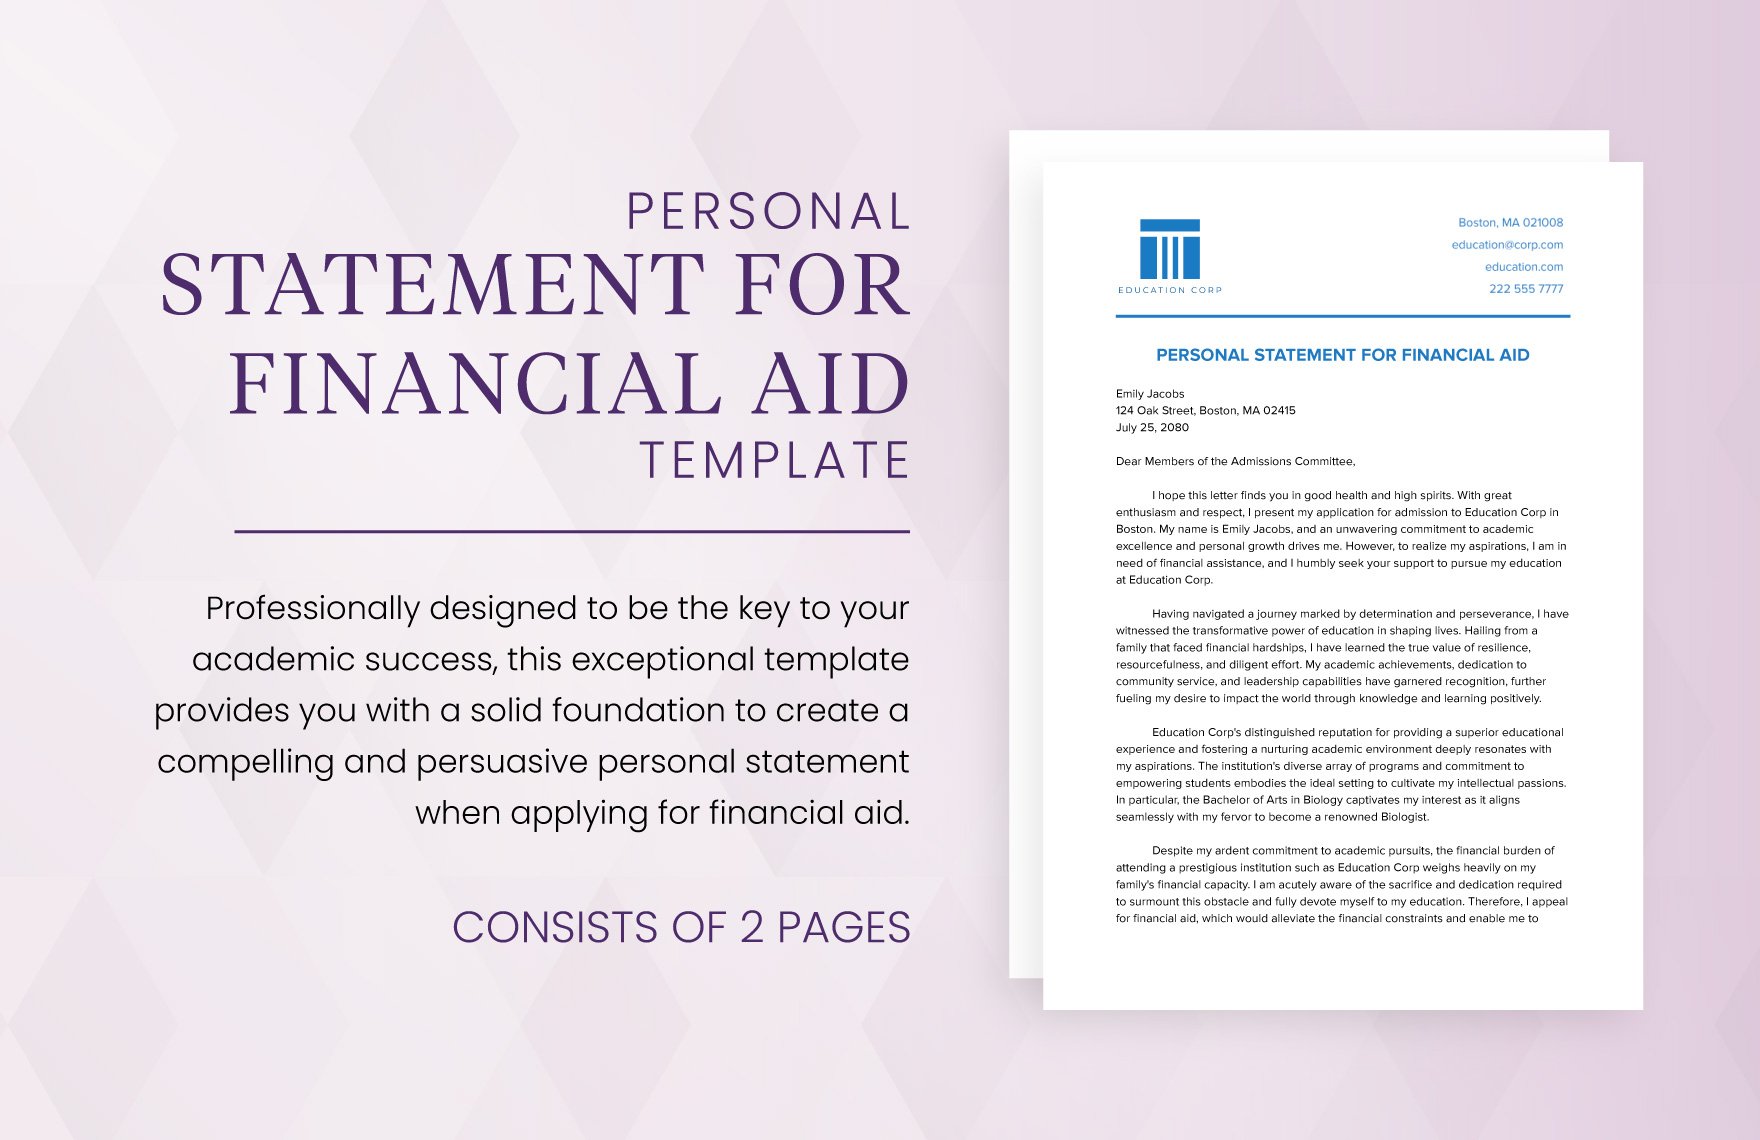 Personal Statement for Financial Aid Template